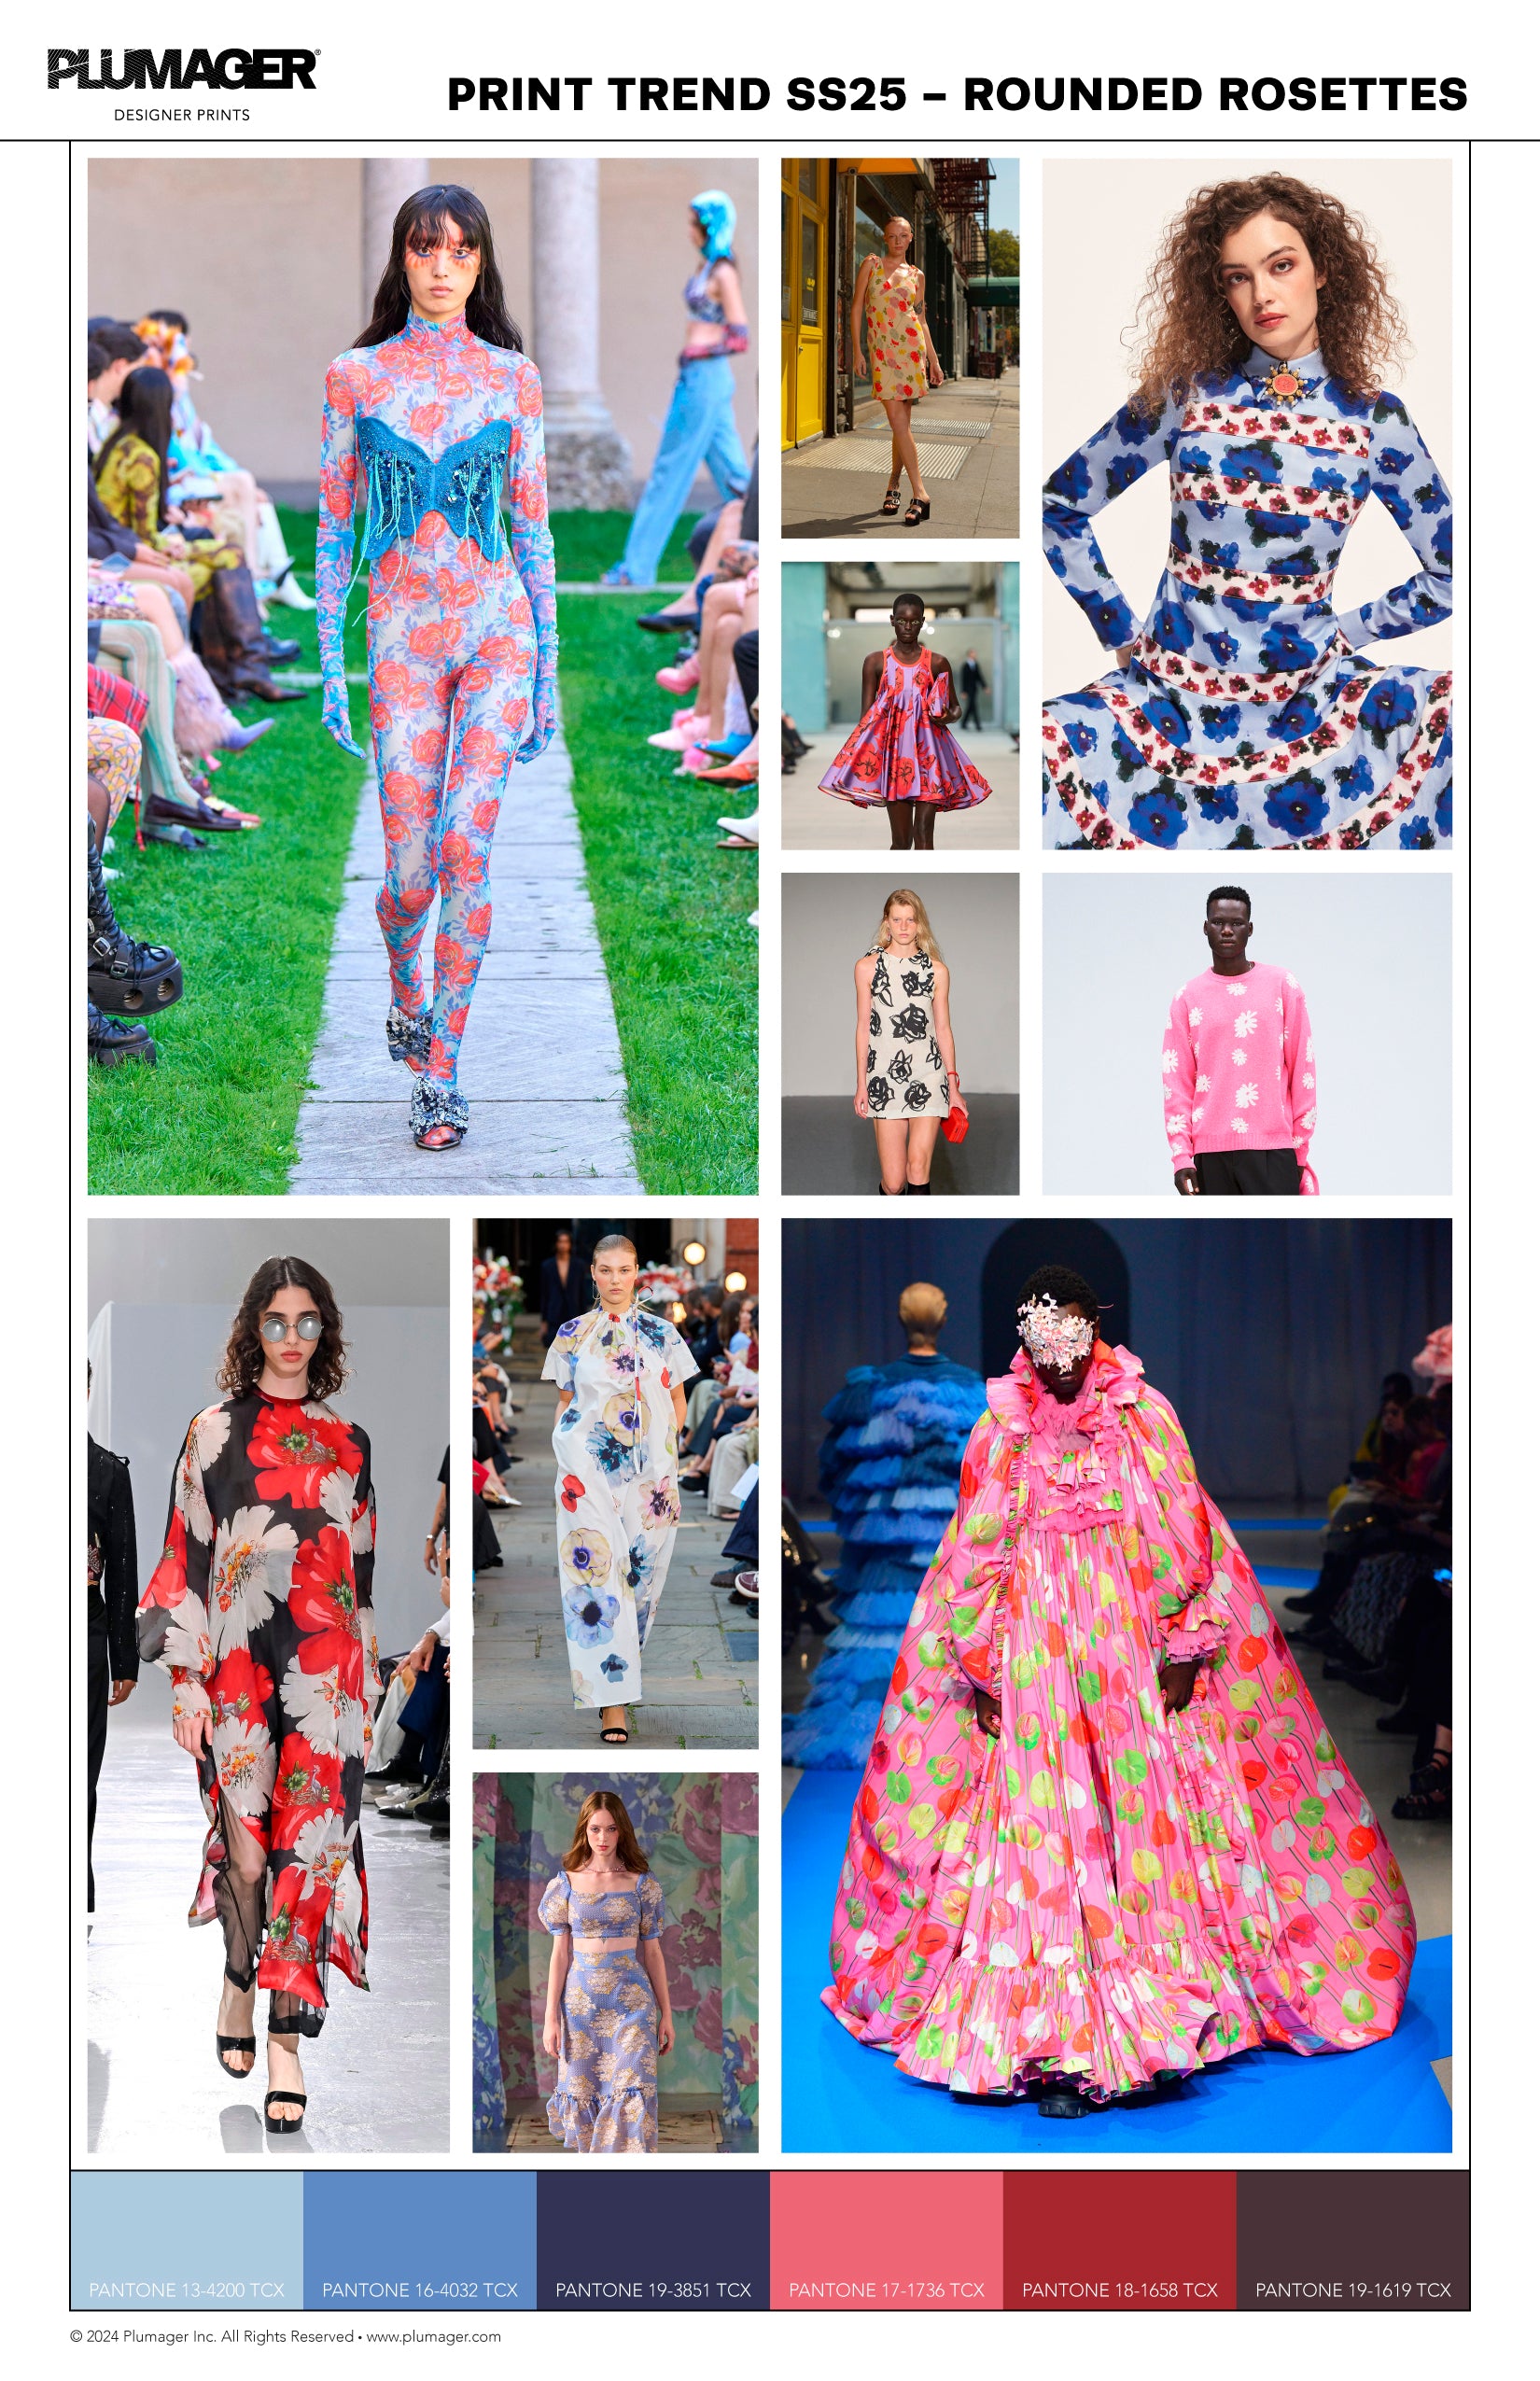 SS25 Print Textile Color Trend Report - Rounded Rosettes